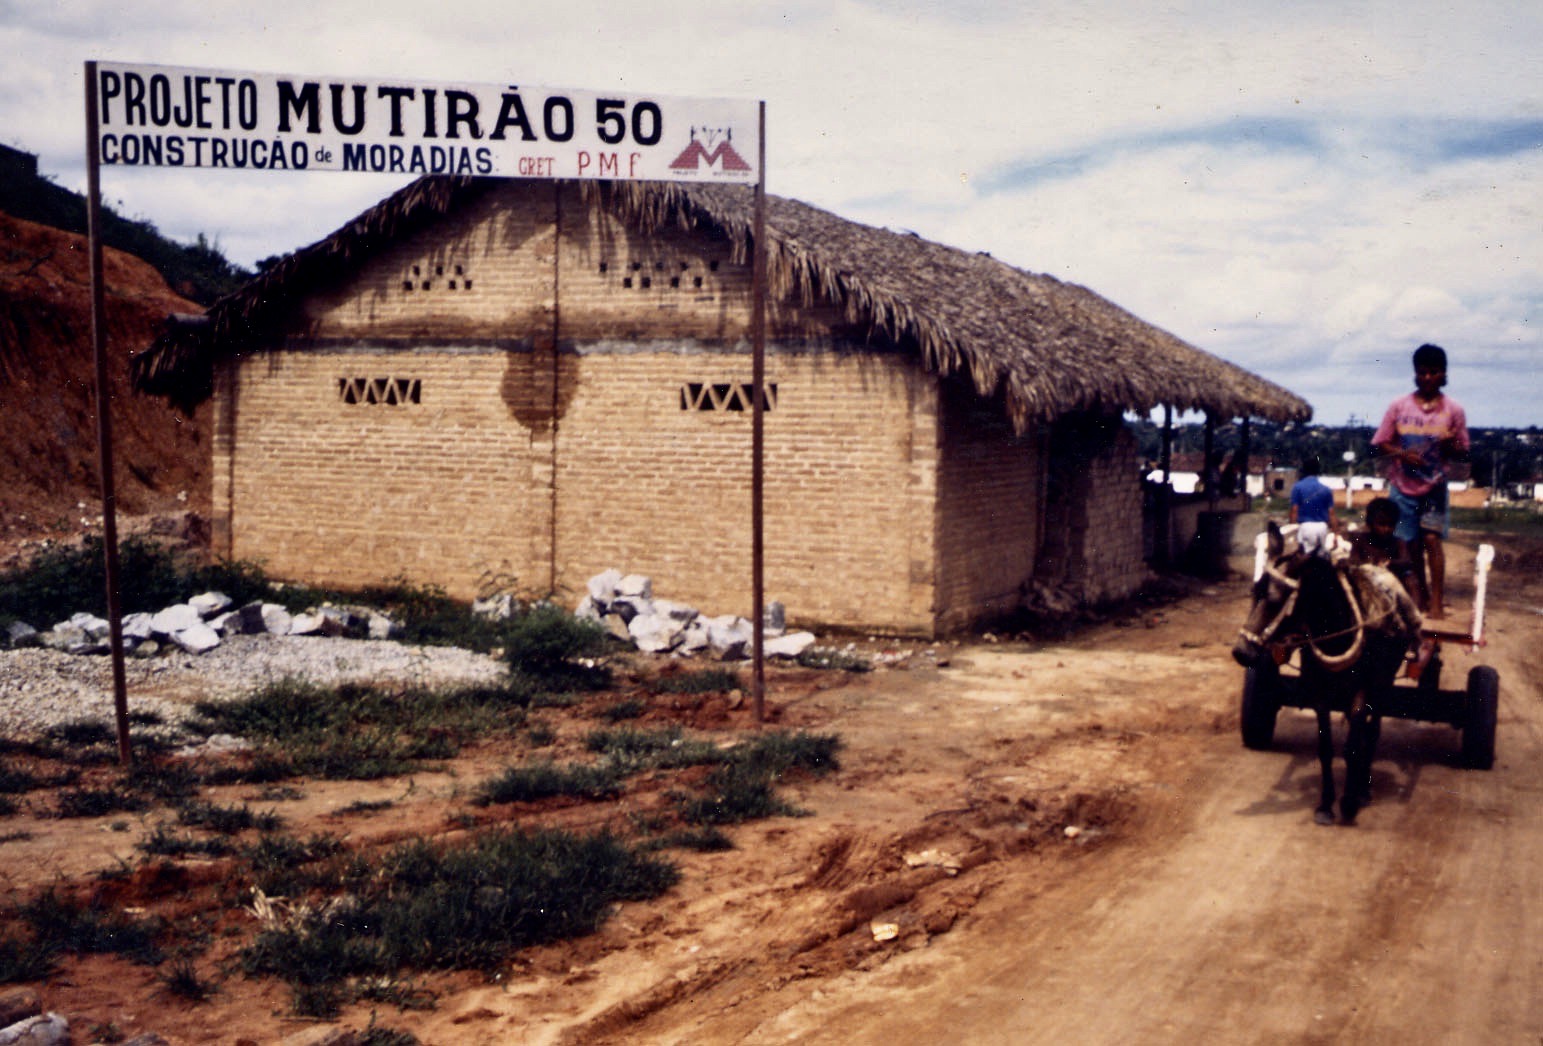 Photo 1: View of the workshop at the entrance to the Mutirão 50 land. At the time, there were no cars in the Conjunto Marechal Rondon Favela (68 hectares, 18,000 residents). Photo: Yves Cabannes